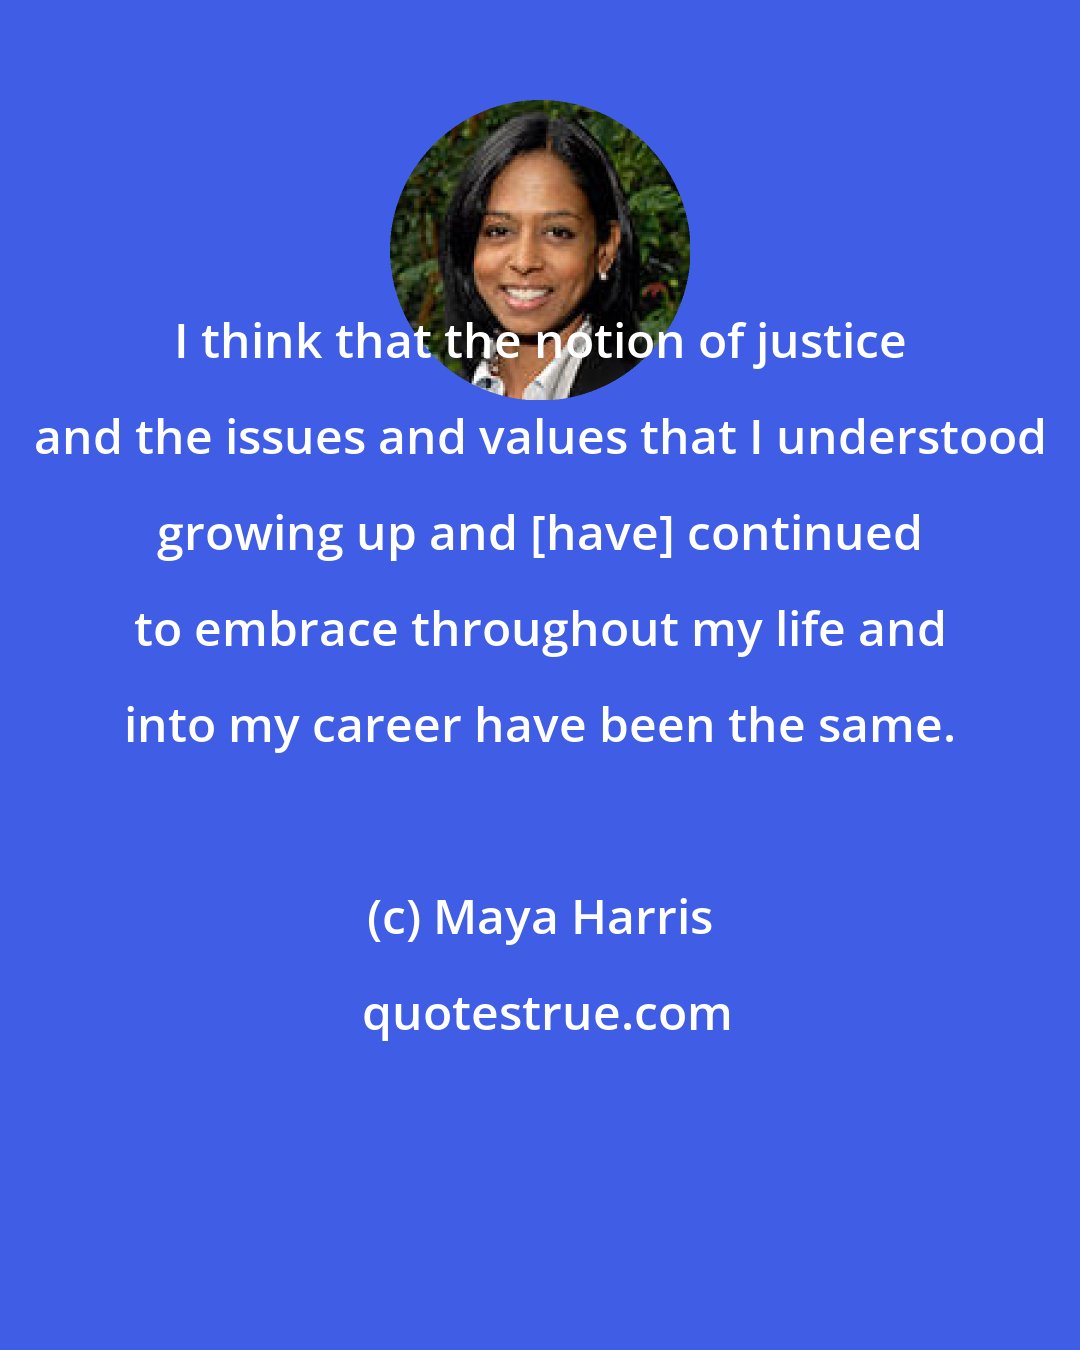 Maya Harris: I think that the notion of justice and the issues and values that I understood growing up and [have] continued to embrace throughout my life and into my career have been the same.